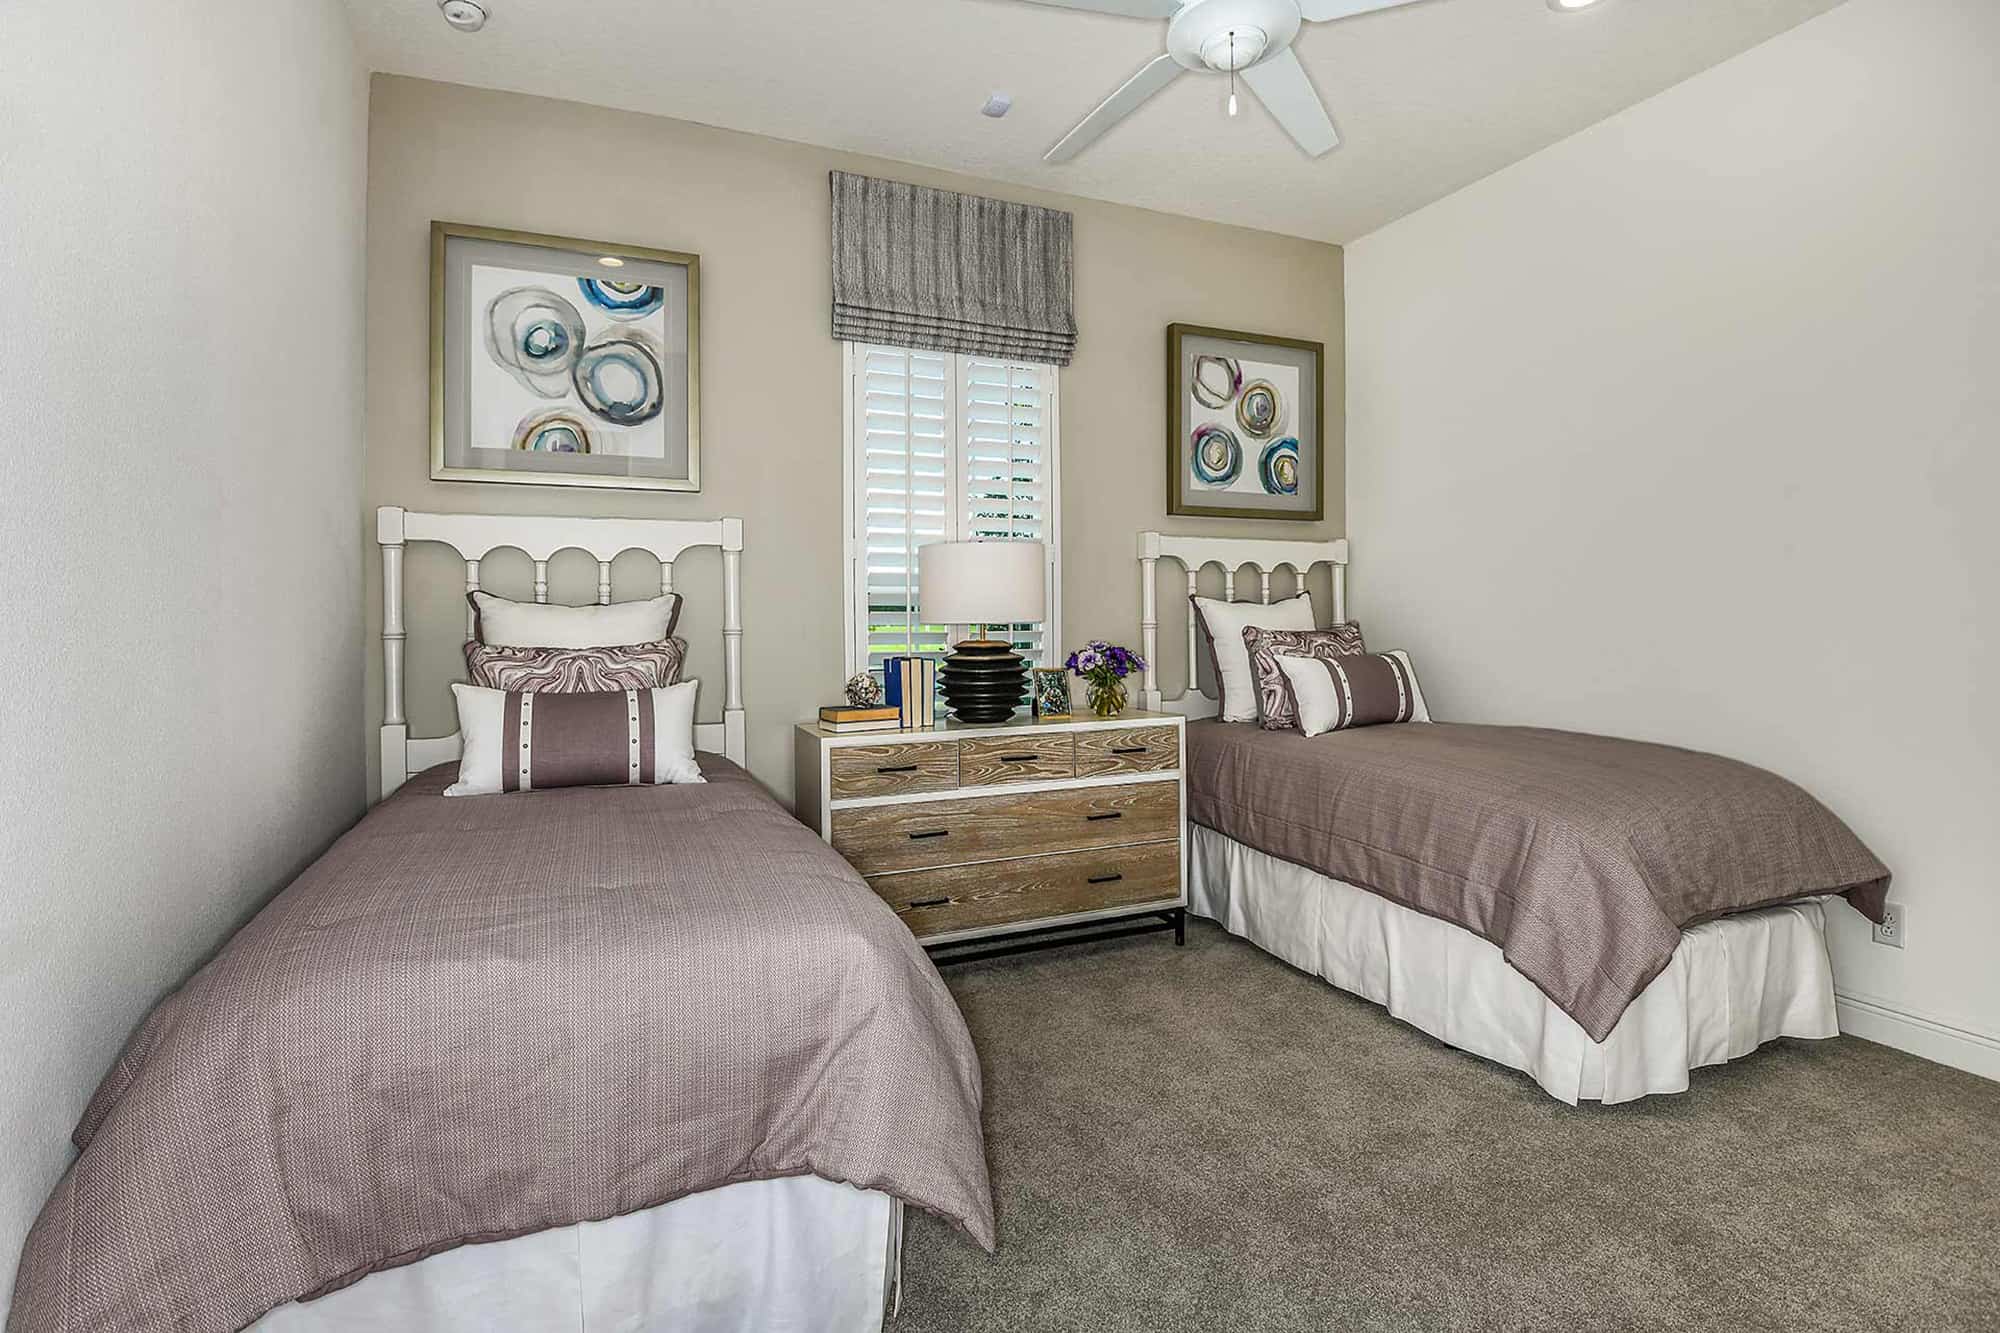 Bedroom at Indigo Endless Summer by Neal Communities